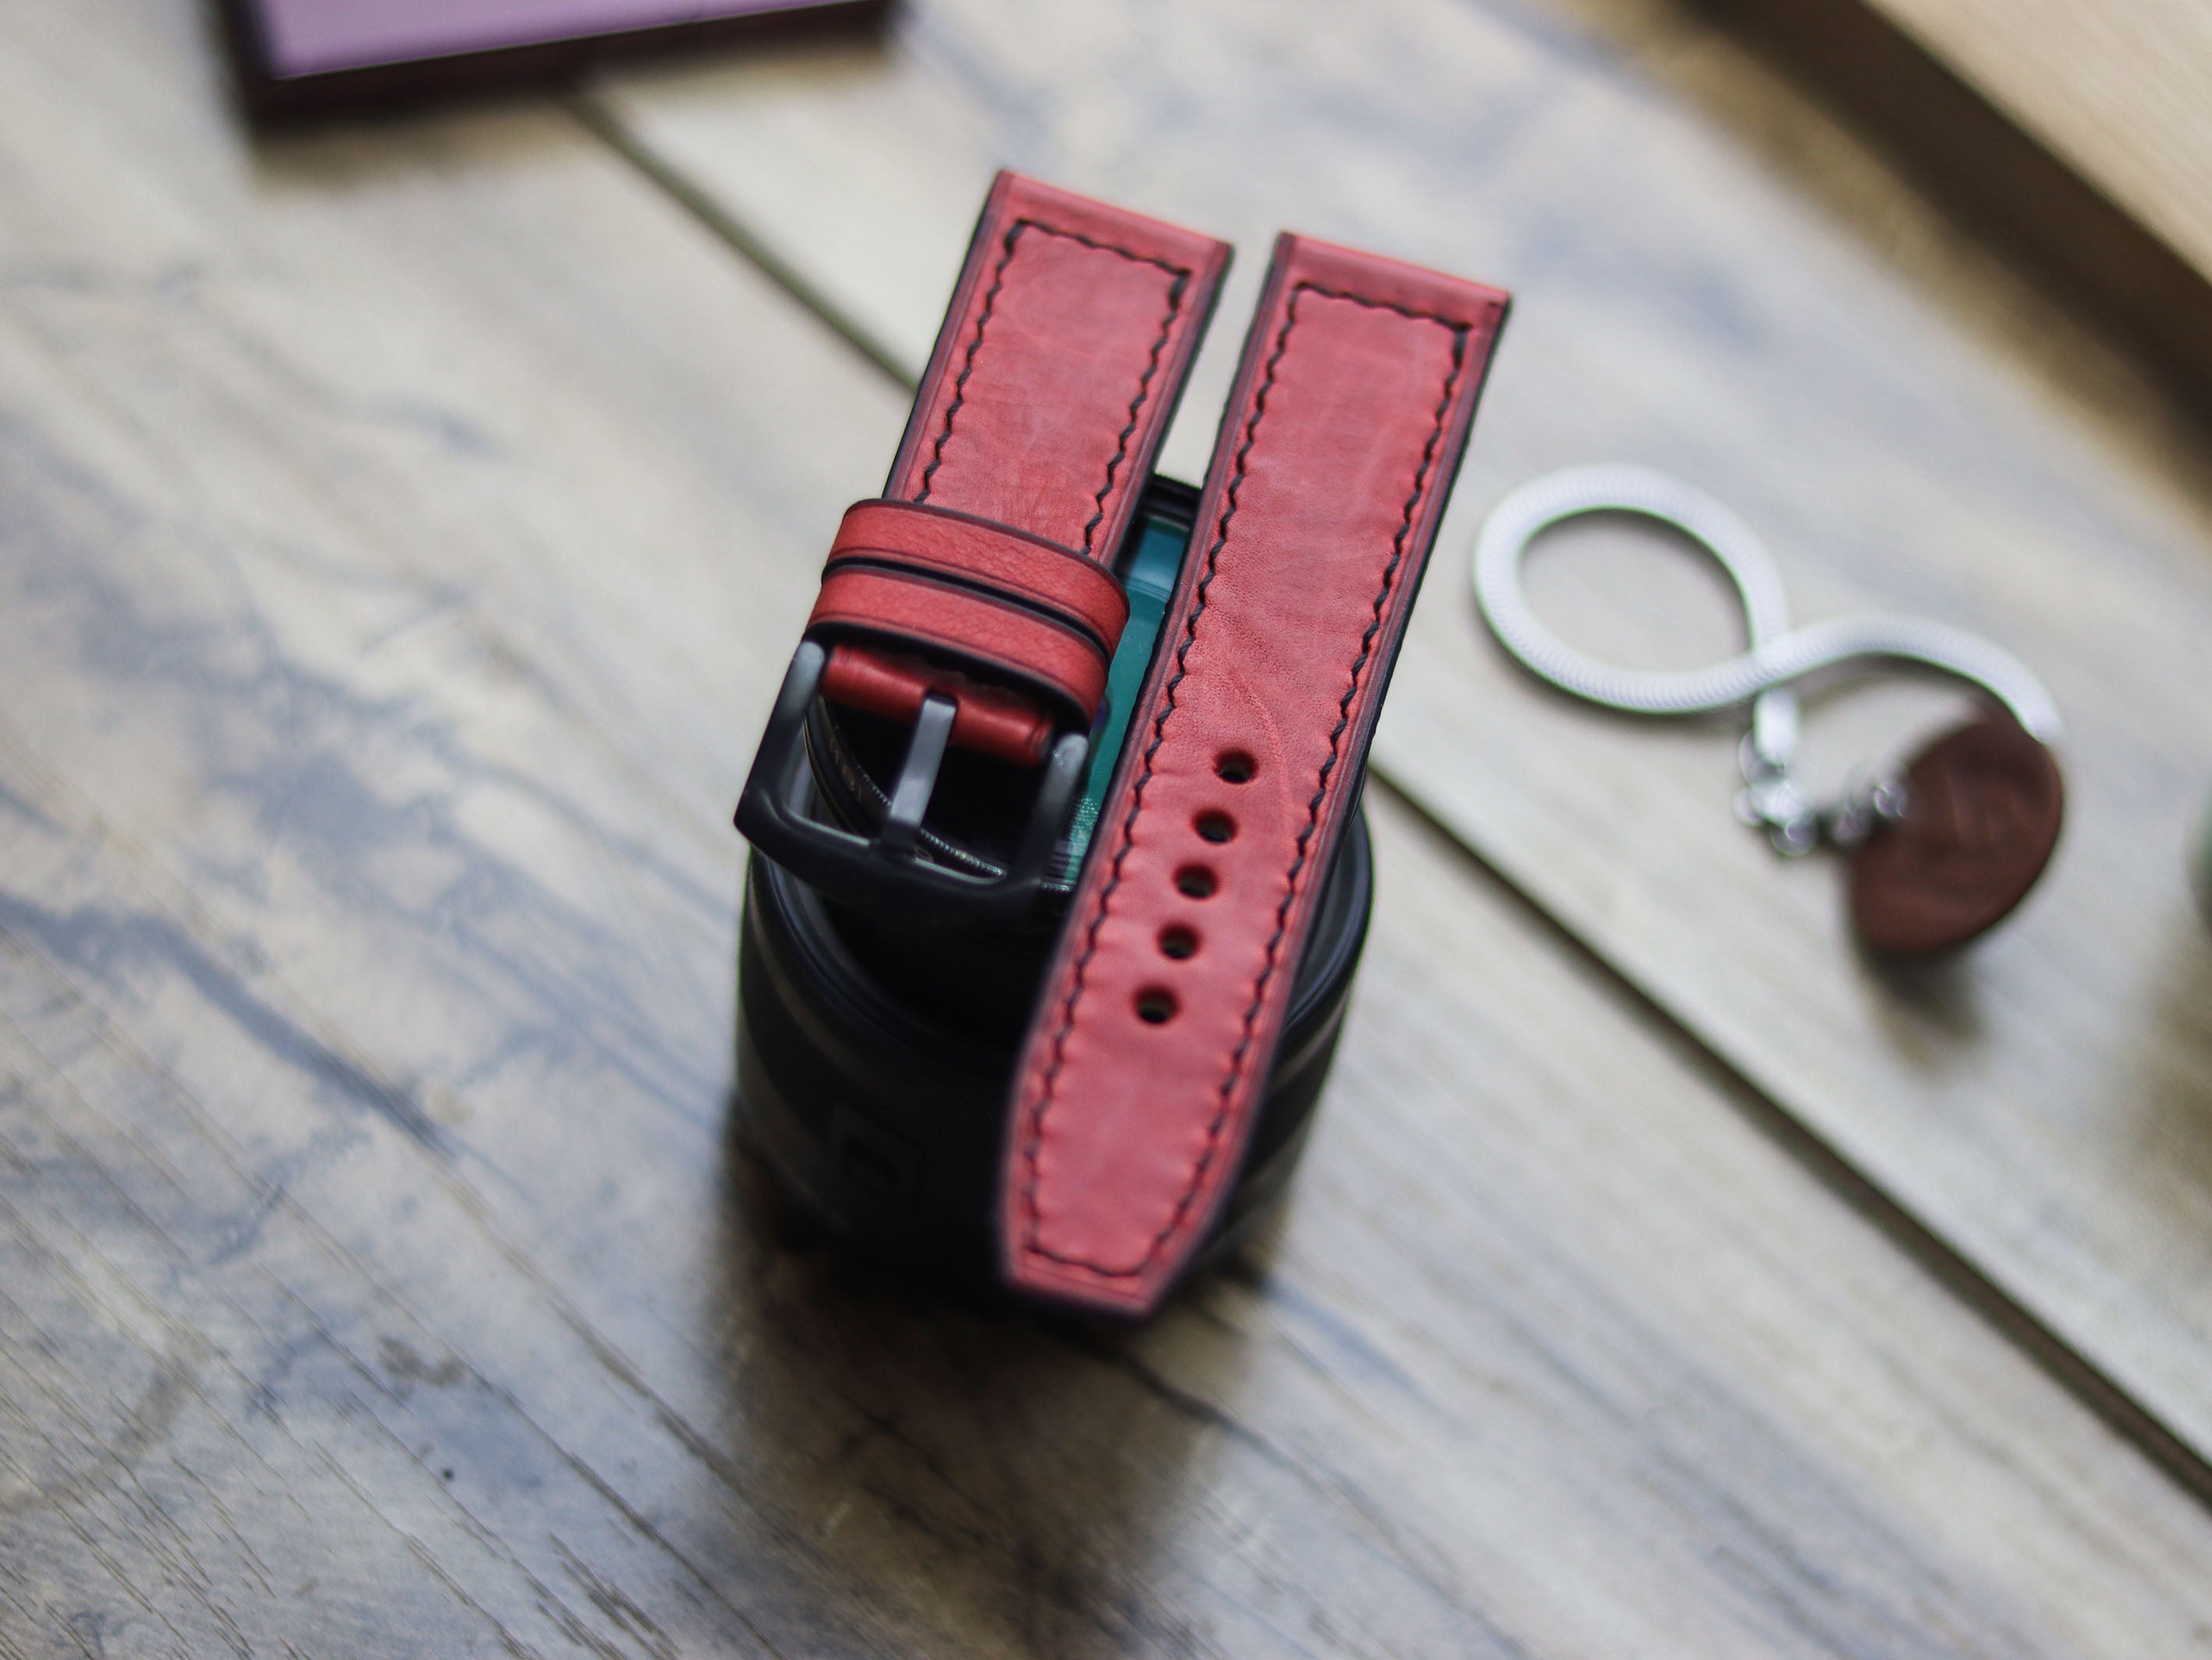 PRISMATIC RED HAND-CRAFTED WATCH STRAPS - BOX STITCHED